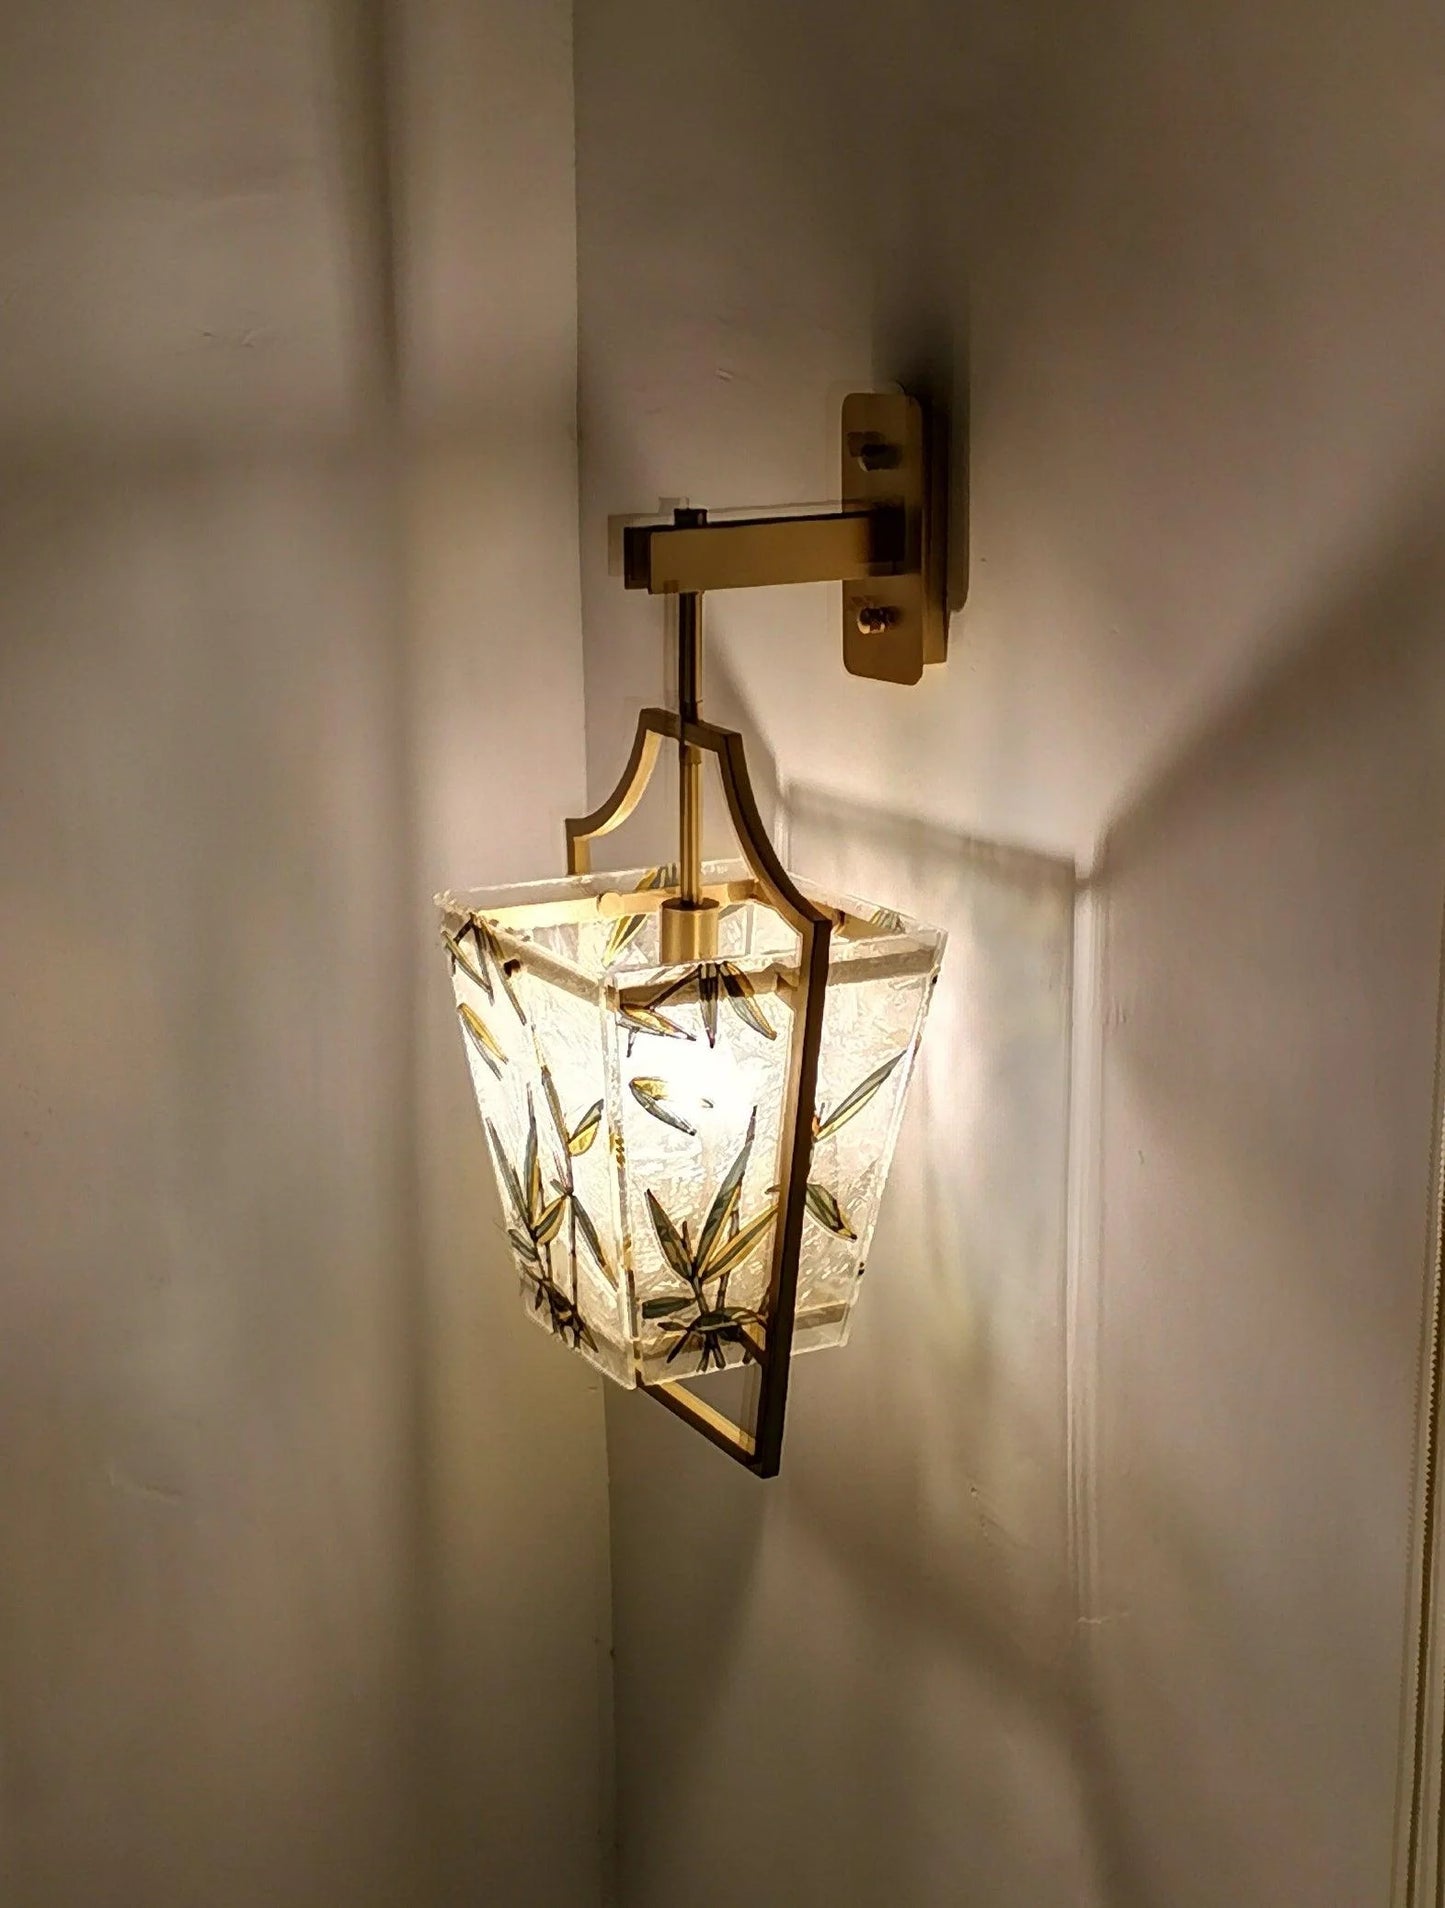 Square Enamelled Wall Lamp